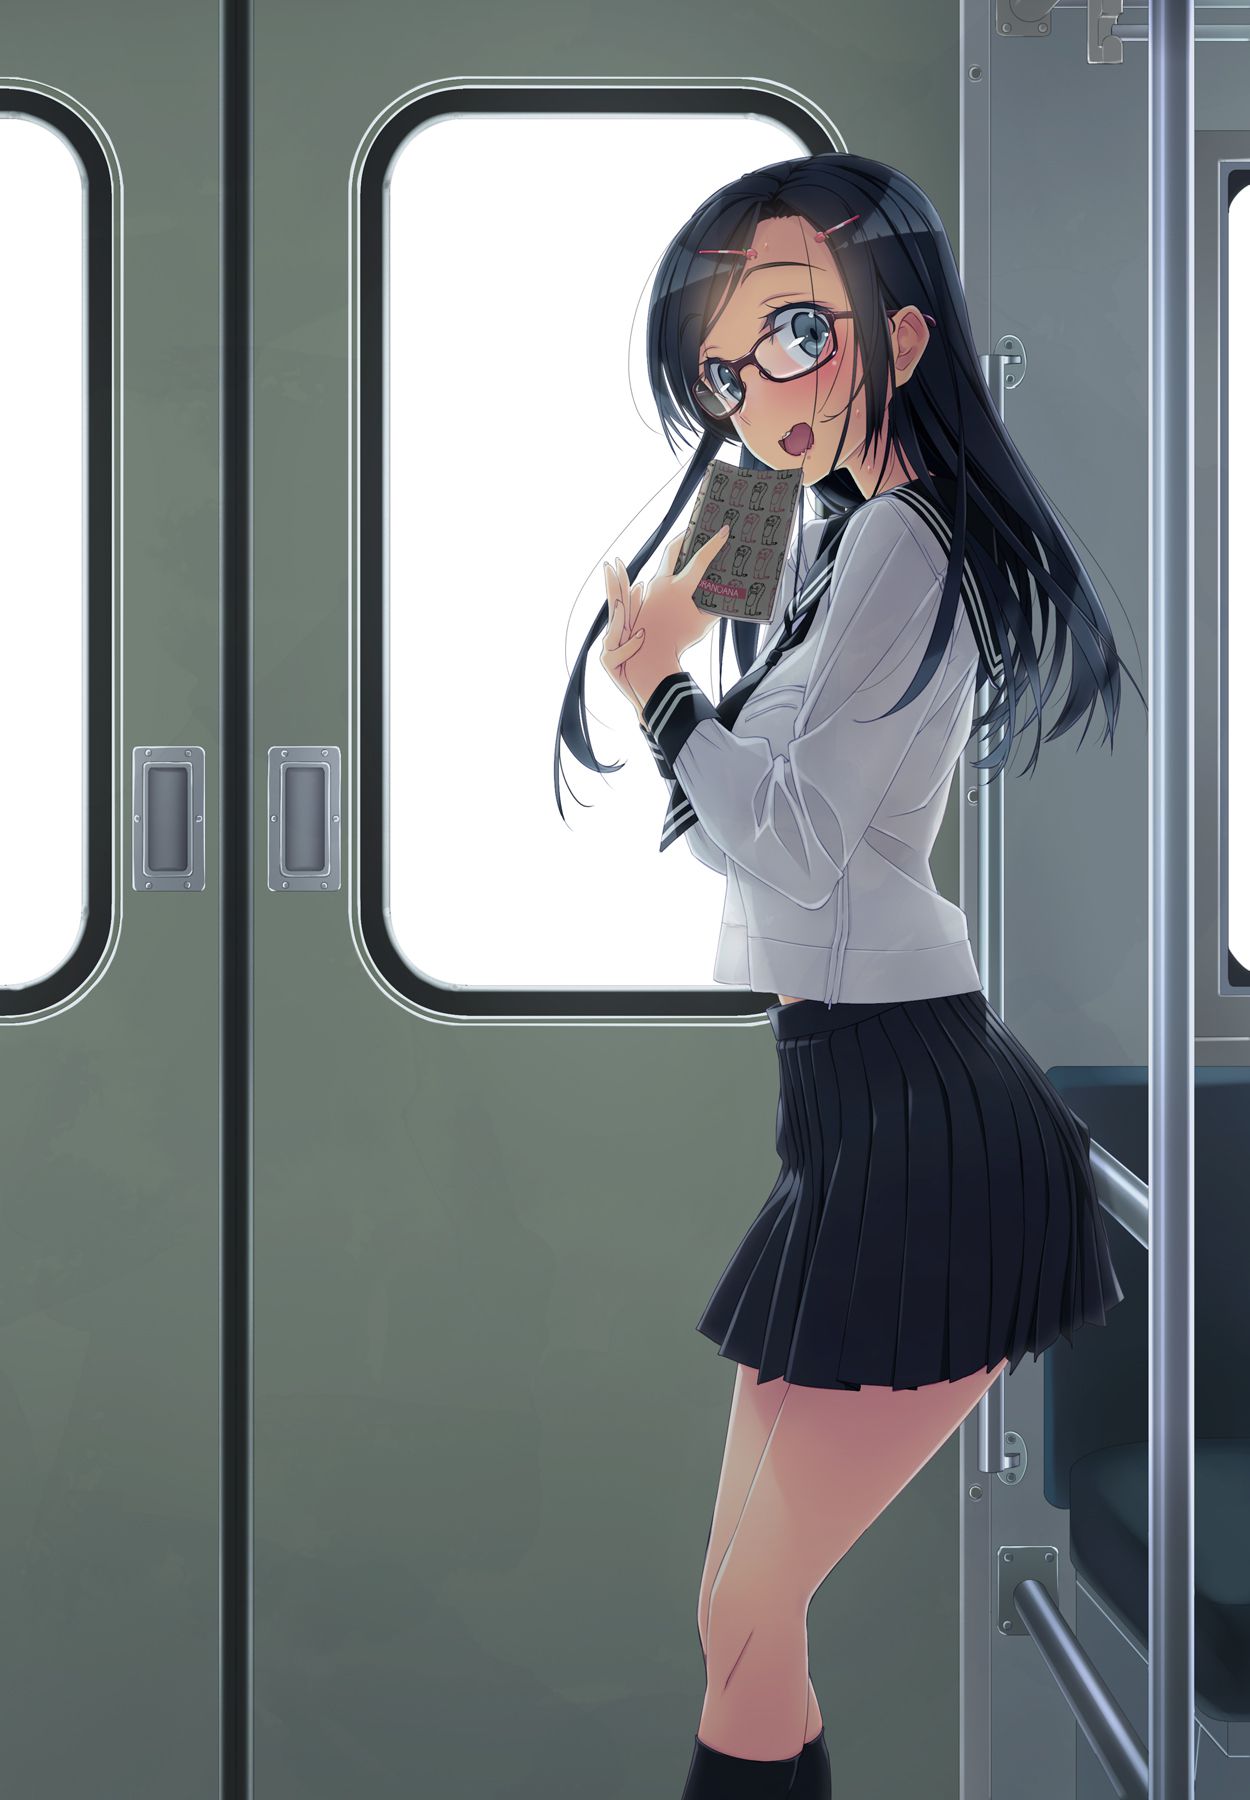 [Secondary] glasses girl Hooray! [Images] part 4 39